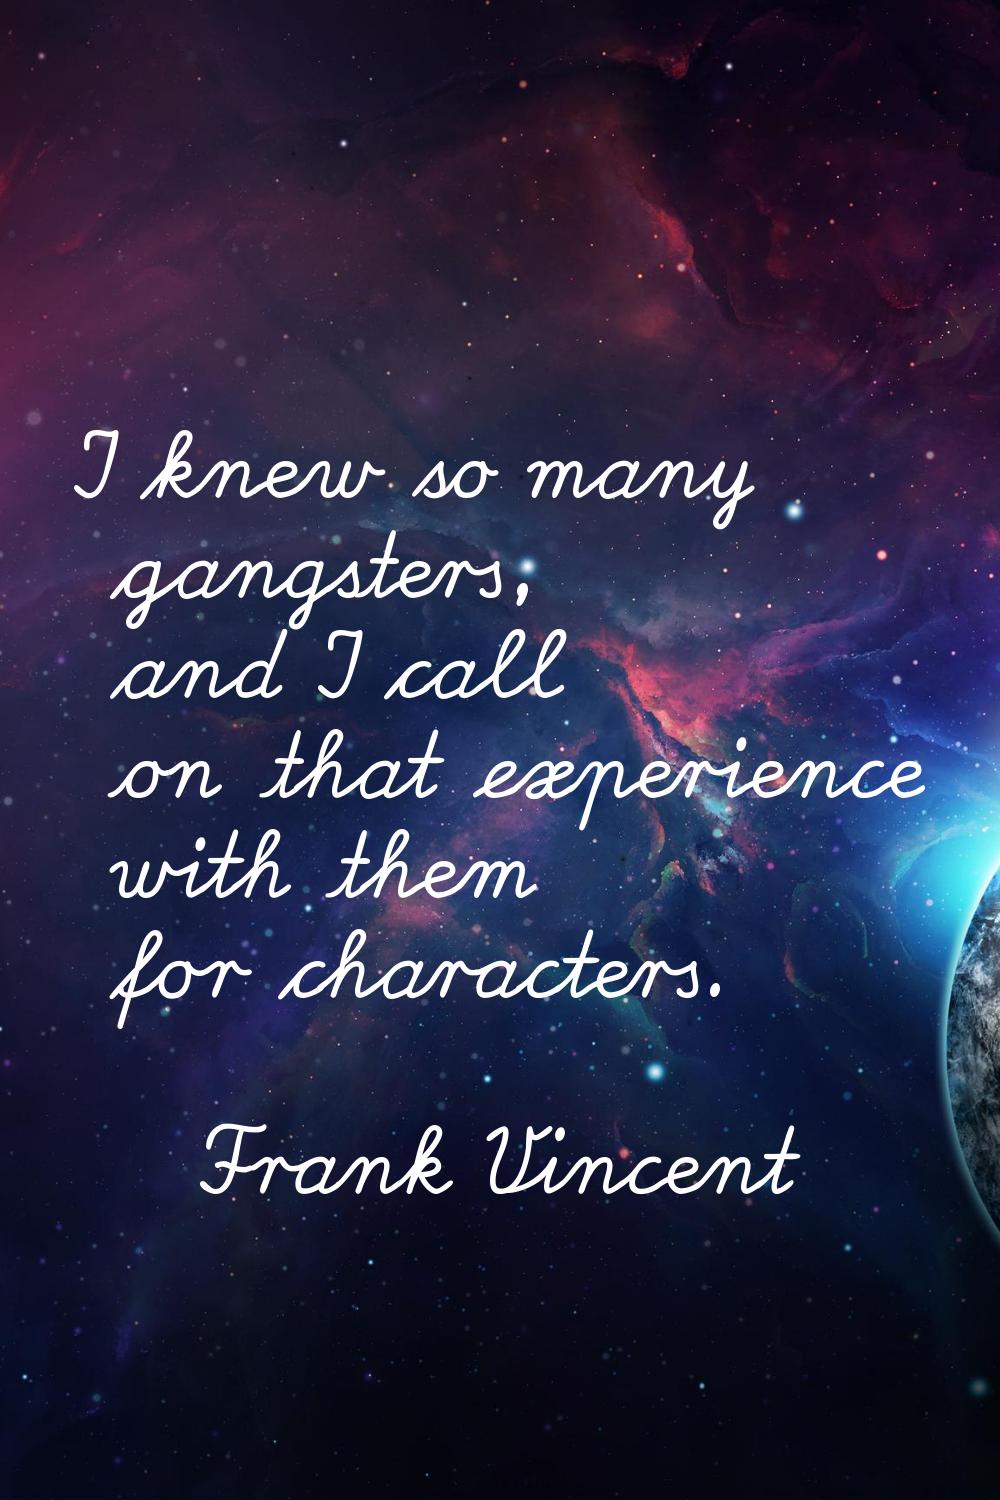 I knew so many gangsters, and I call on that experience with them for characters.